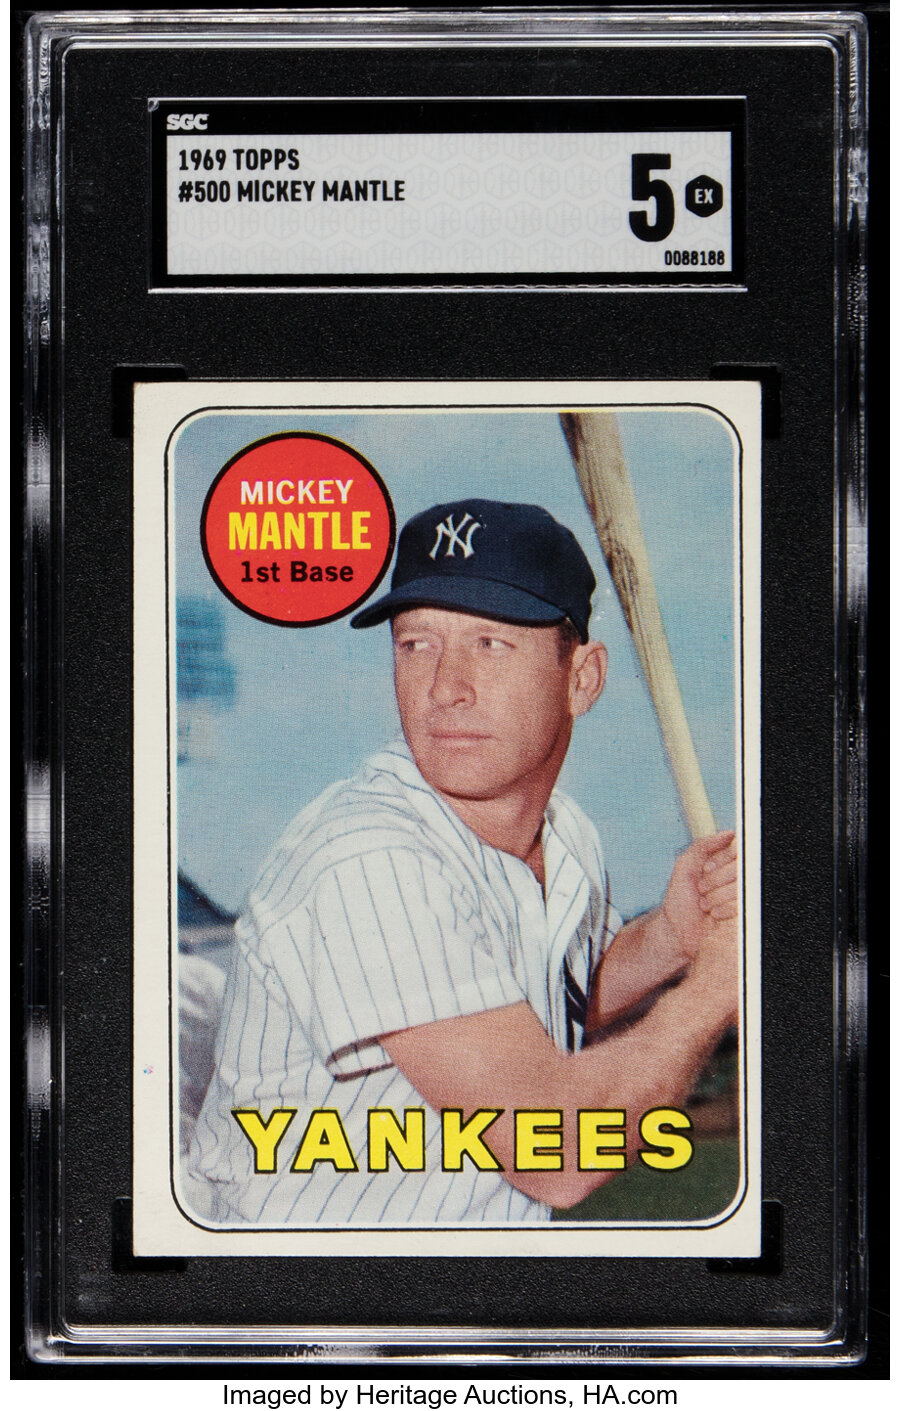 1969 Topps Mickey Mantle (Last Name In Yellow) #500 SGC EX 5